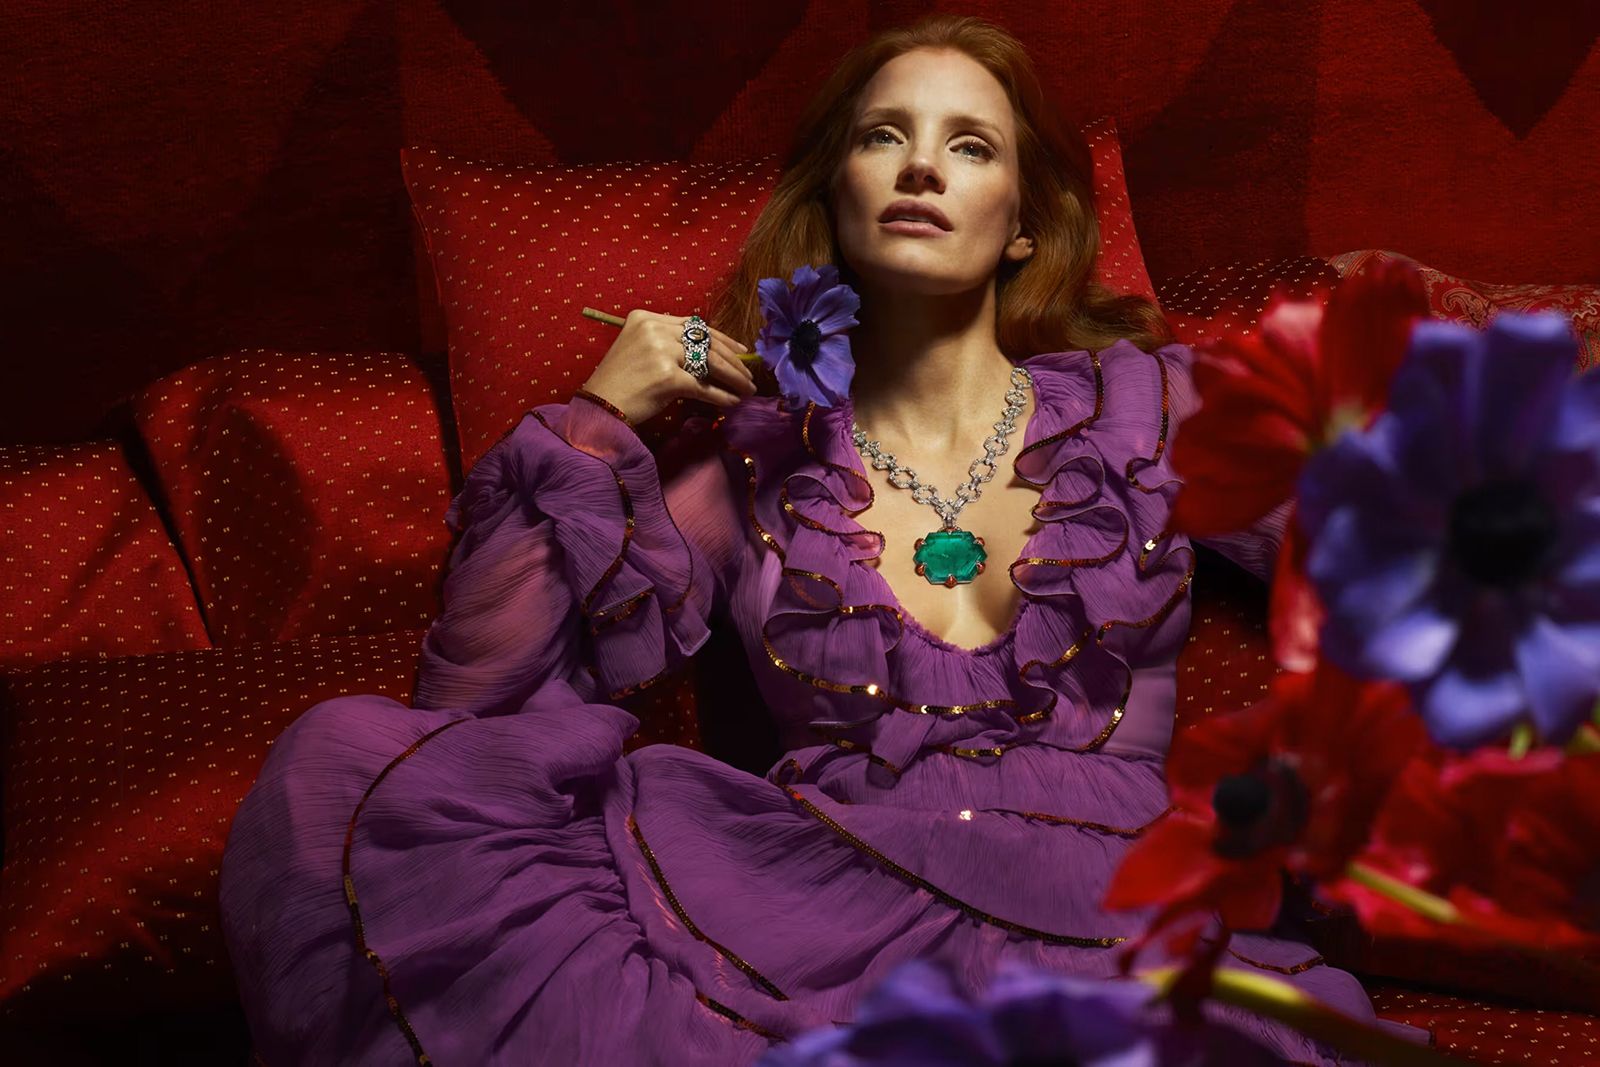 Gucci necklace worn by actress Jessica Chastain with a 172.41 carat hexagon-shaped emerald from the Hortus Deliciarum High Jewellery collection